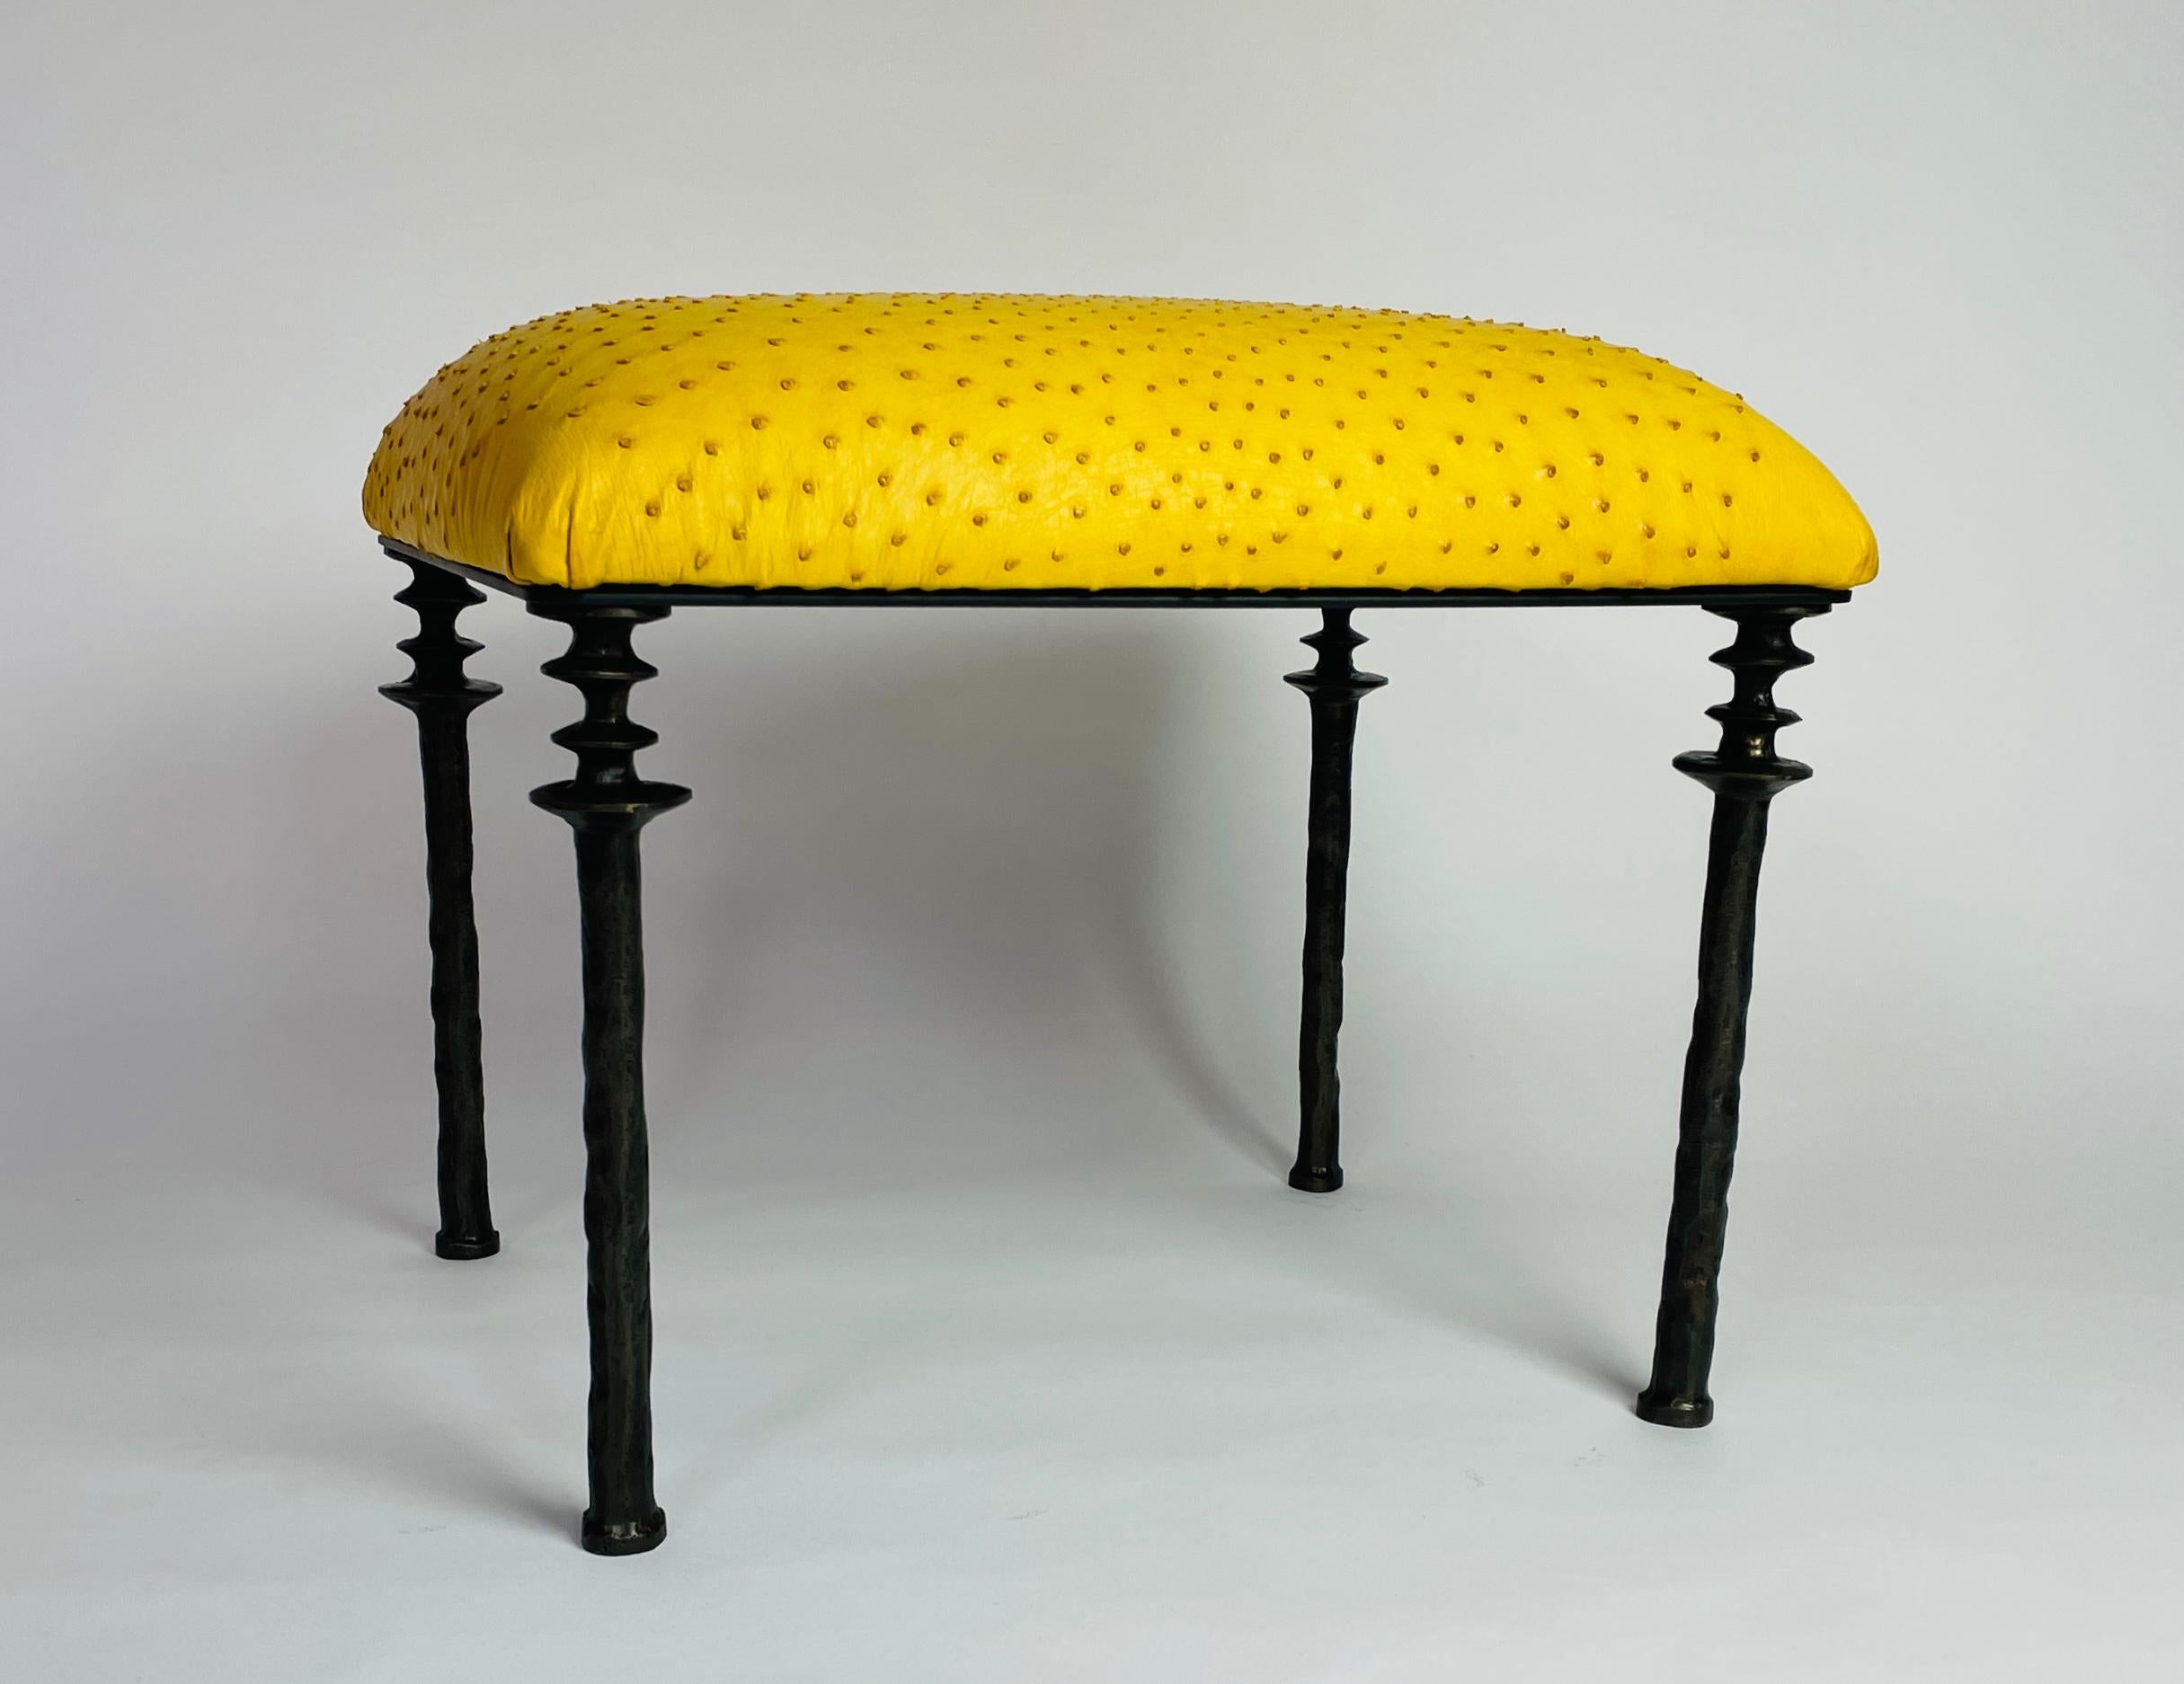 Organic Modern Pair of Sorgue Stools, by Bourgeois Boheme Atelier, Citron Ostrich Leather For Sale